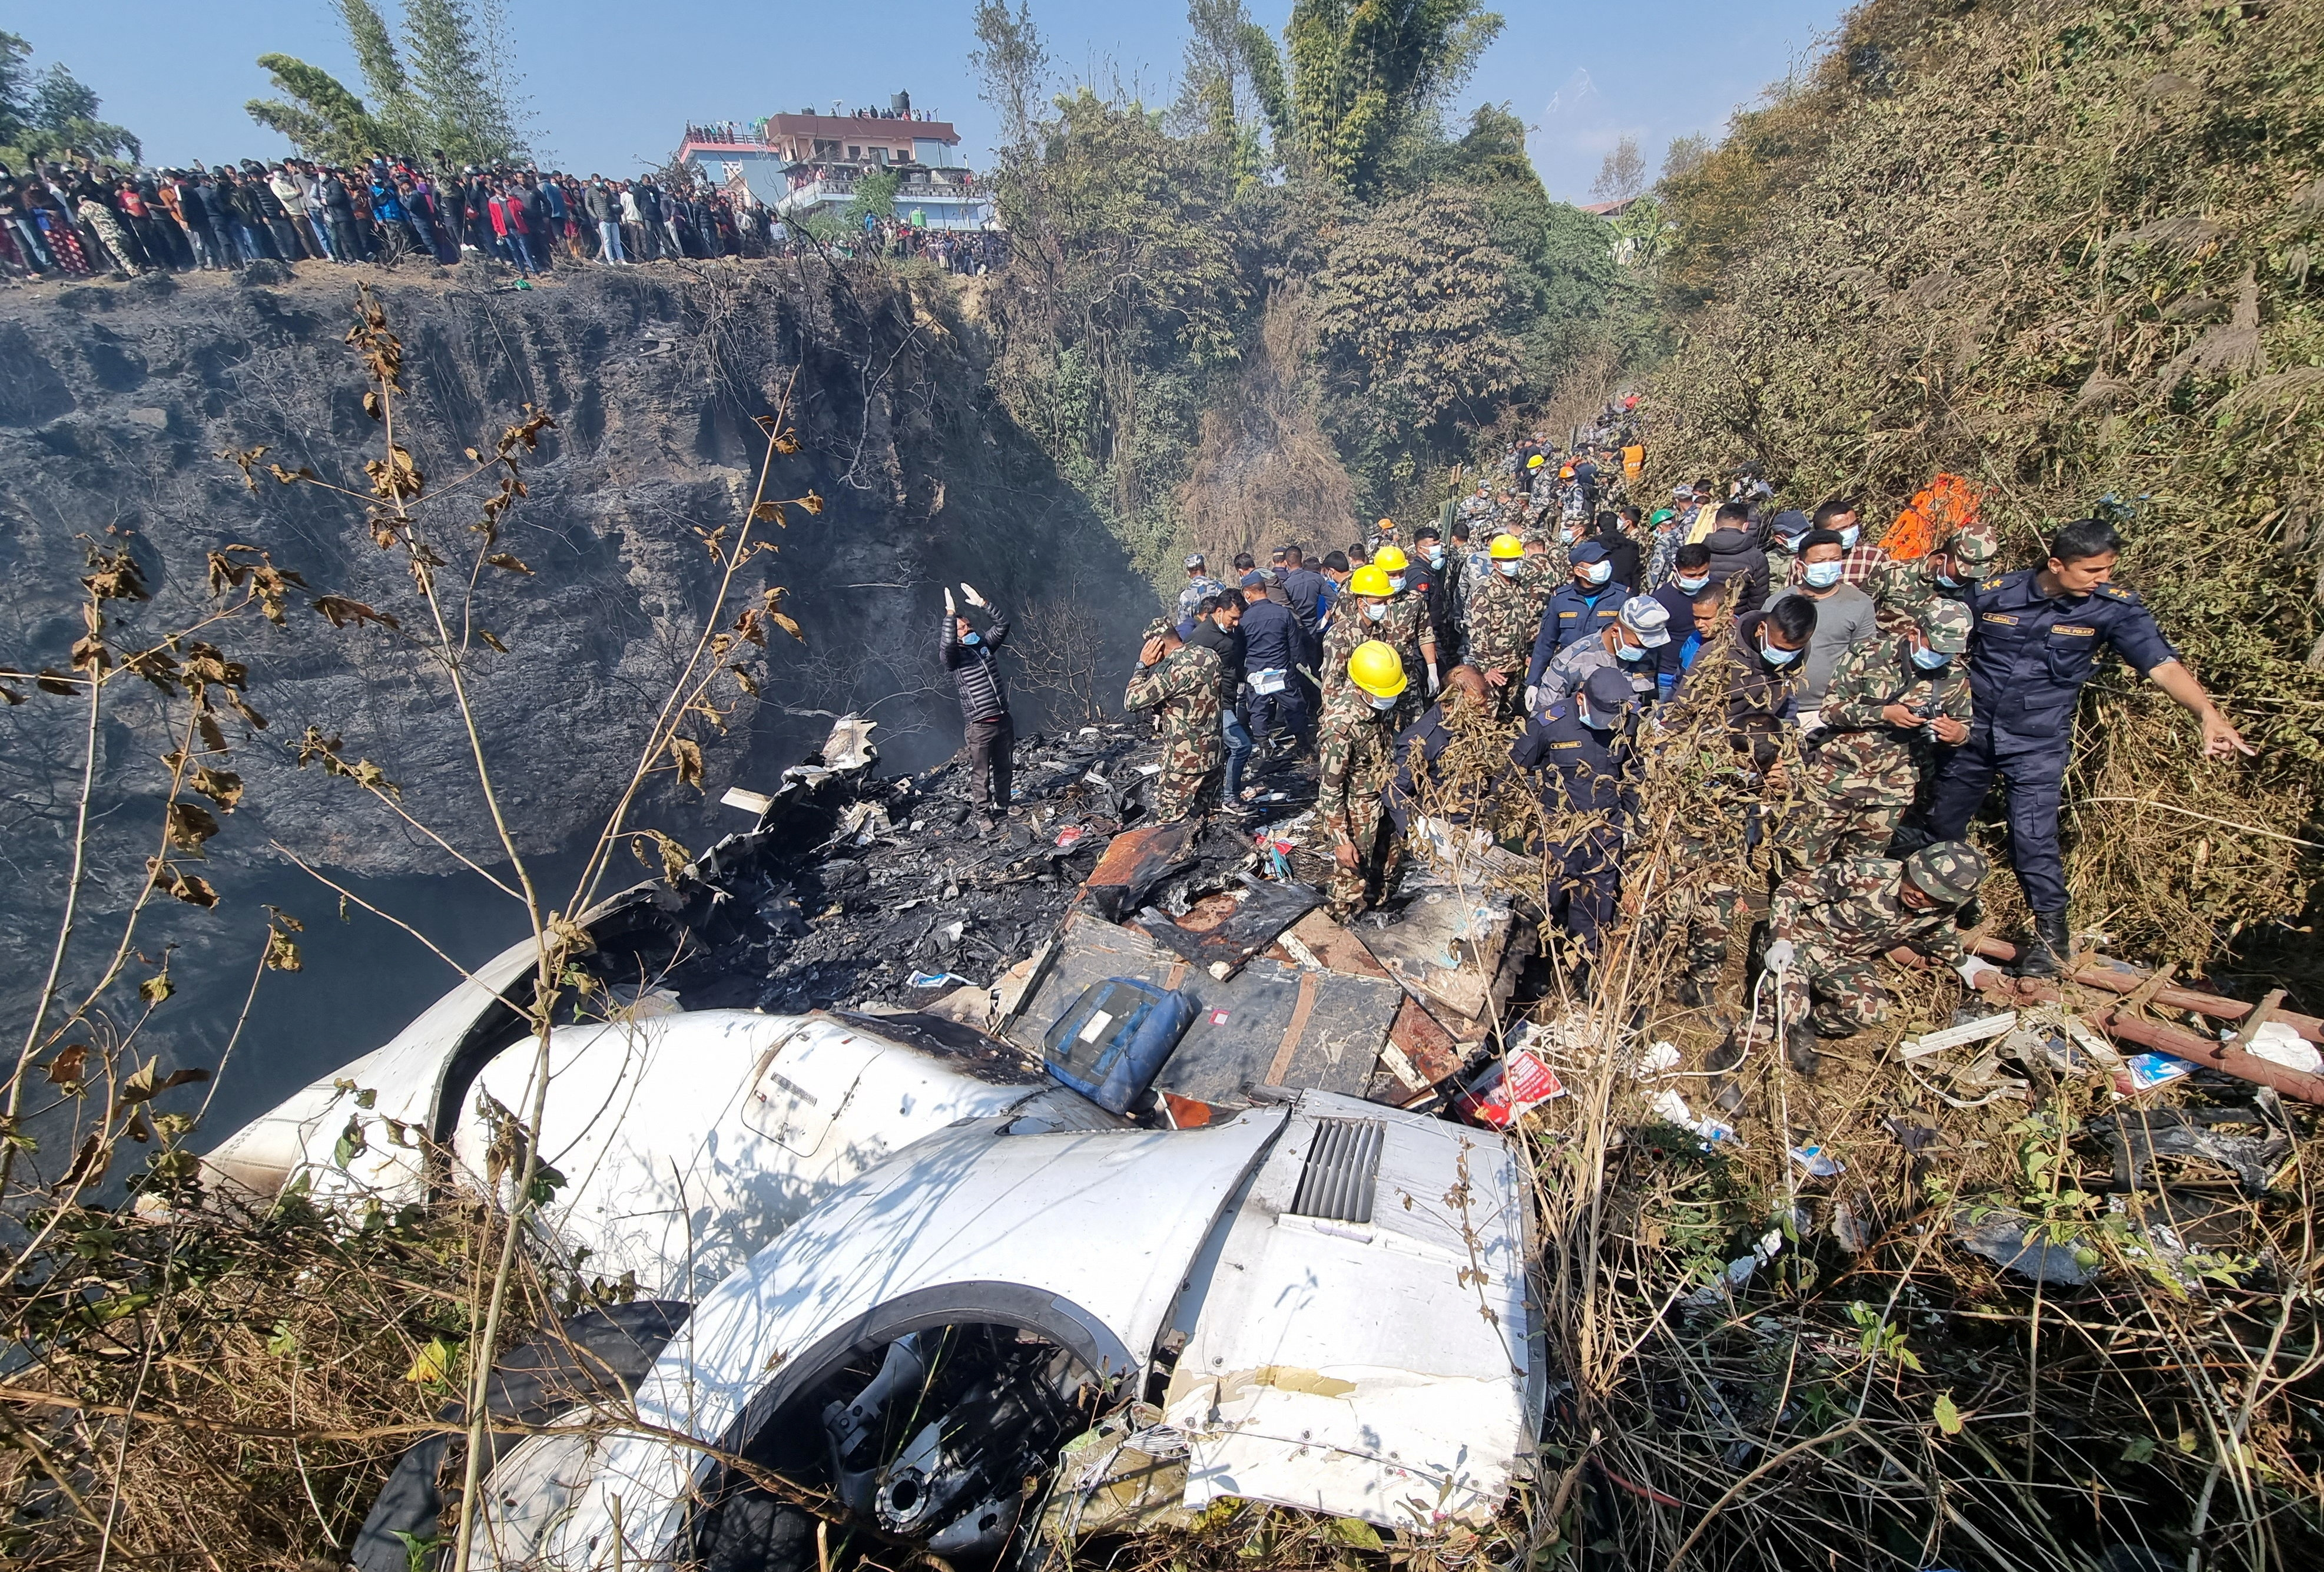 An aircraft carrying 72 people crashed in Pokhara